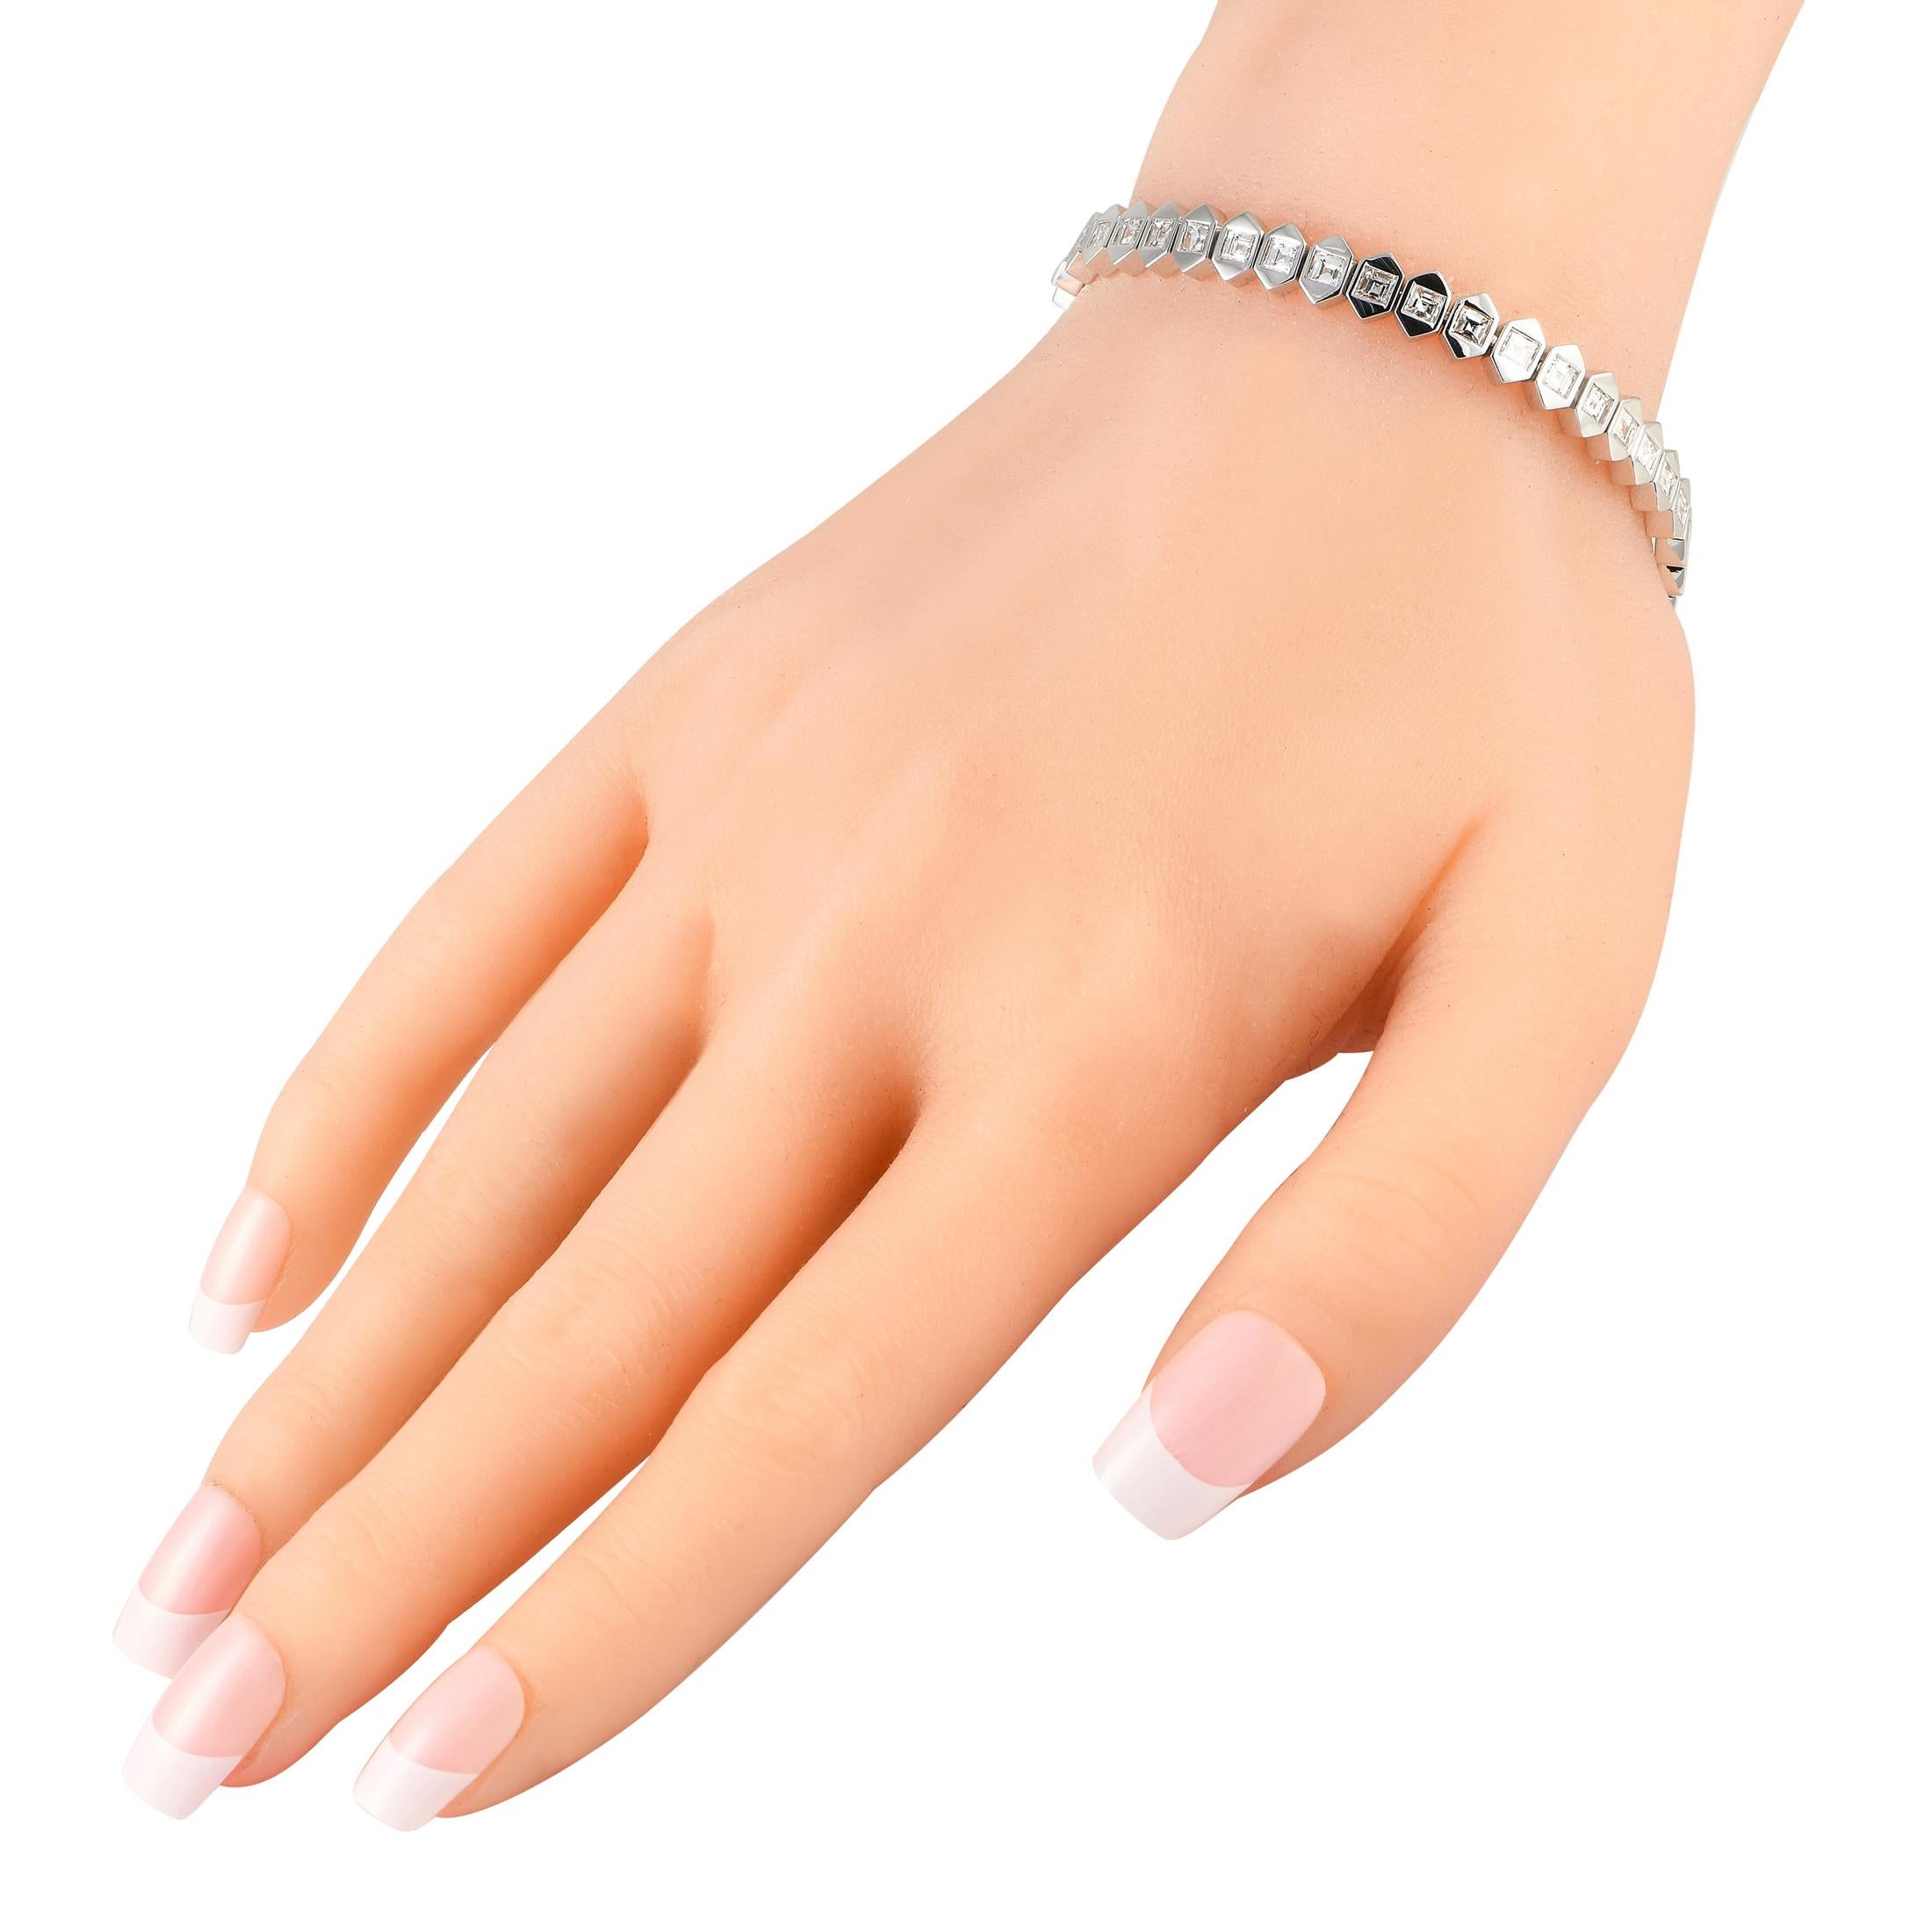 Designed to look both edgy and chic, this geometric bracelet would make a fantastic addition to any outfit. It is fashioned in solid 18K white gold, with a series of elongated hexagonal tiles that form an unbroken row. Each six-sided tile carries a